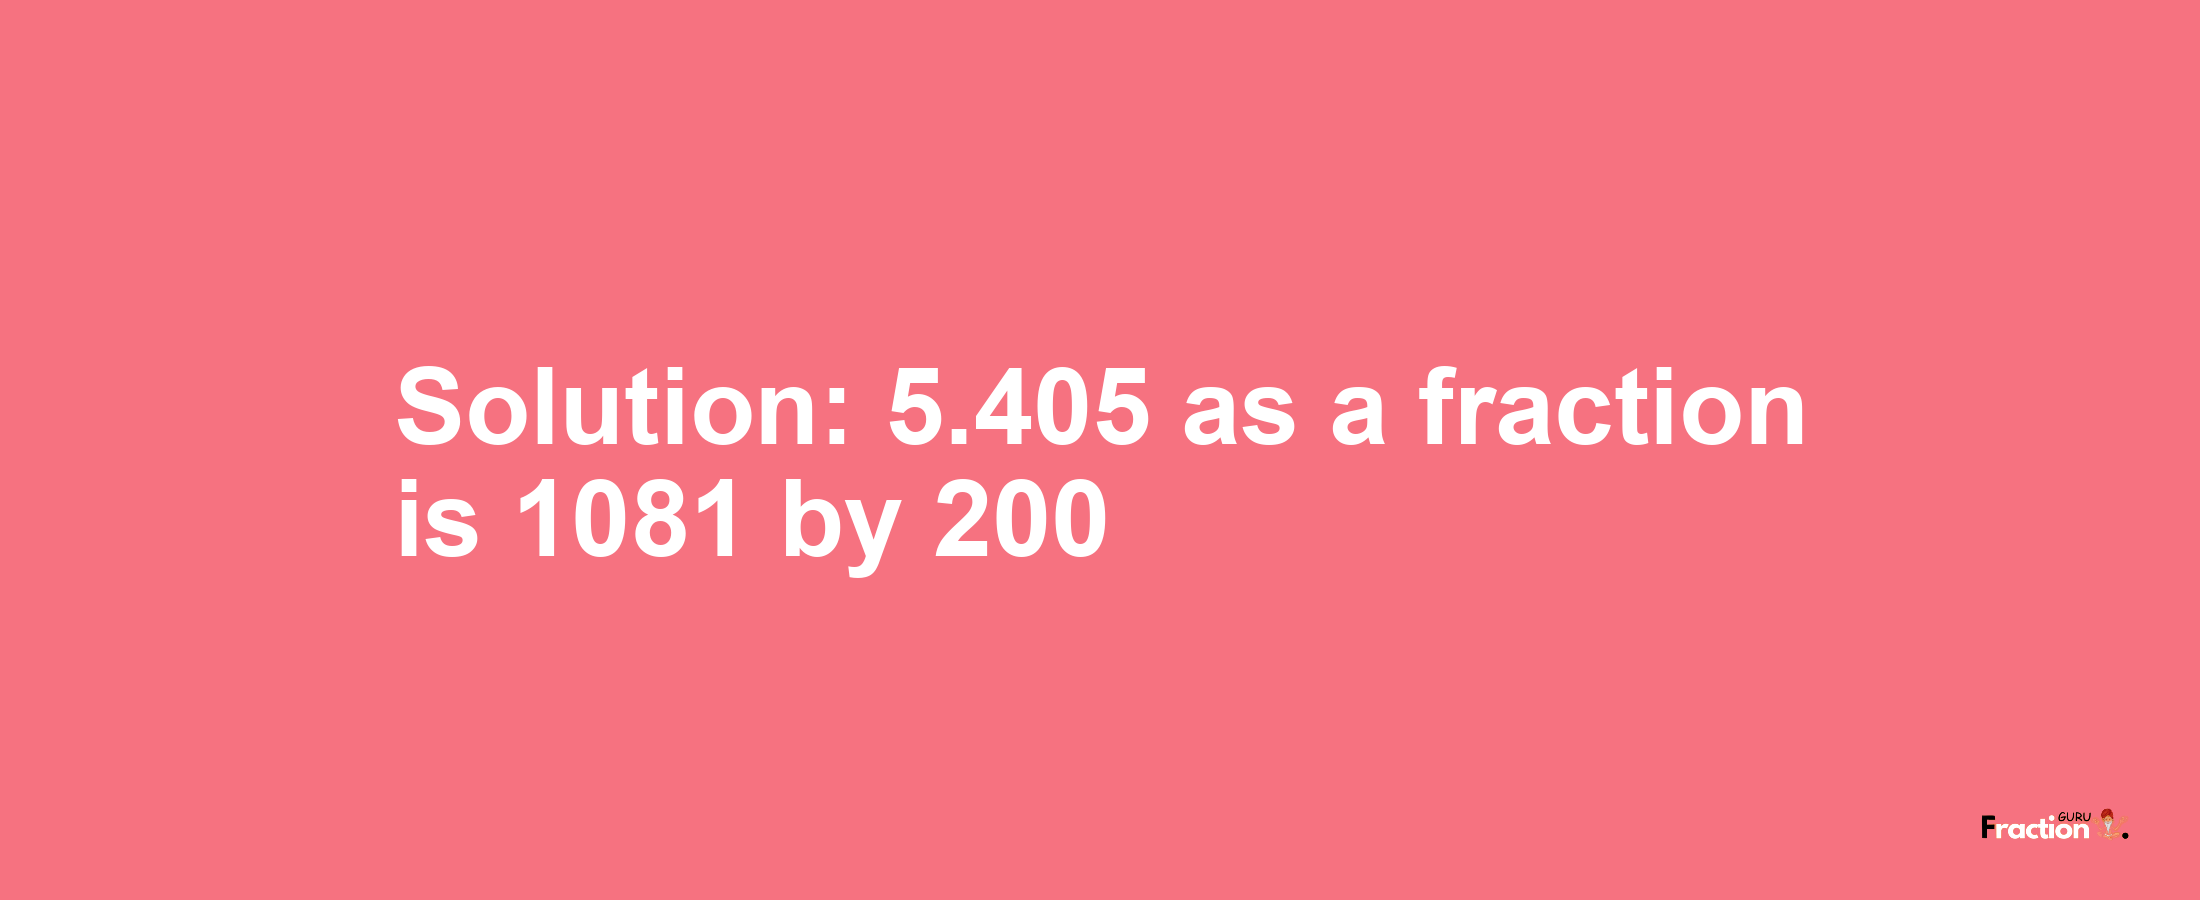 Solution:5.405 as a fraction is 1081/200